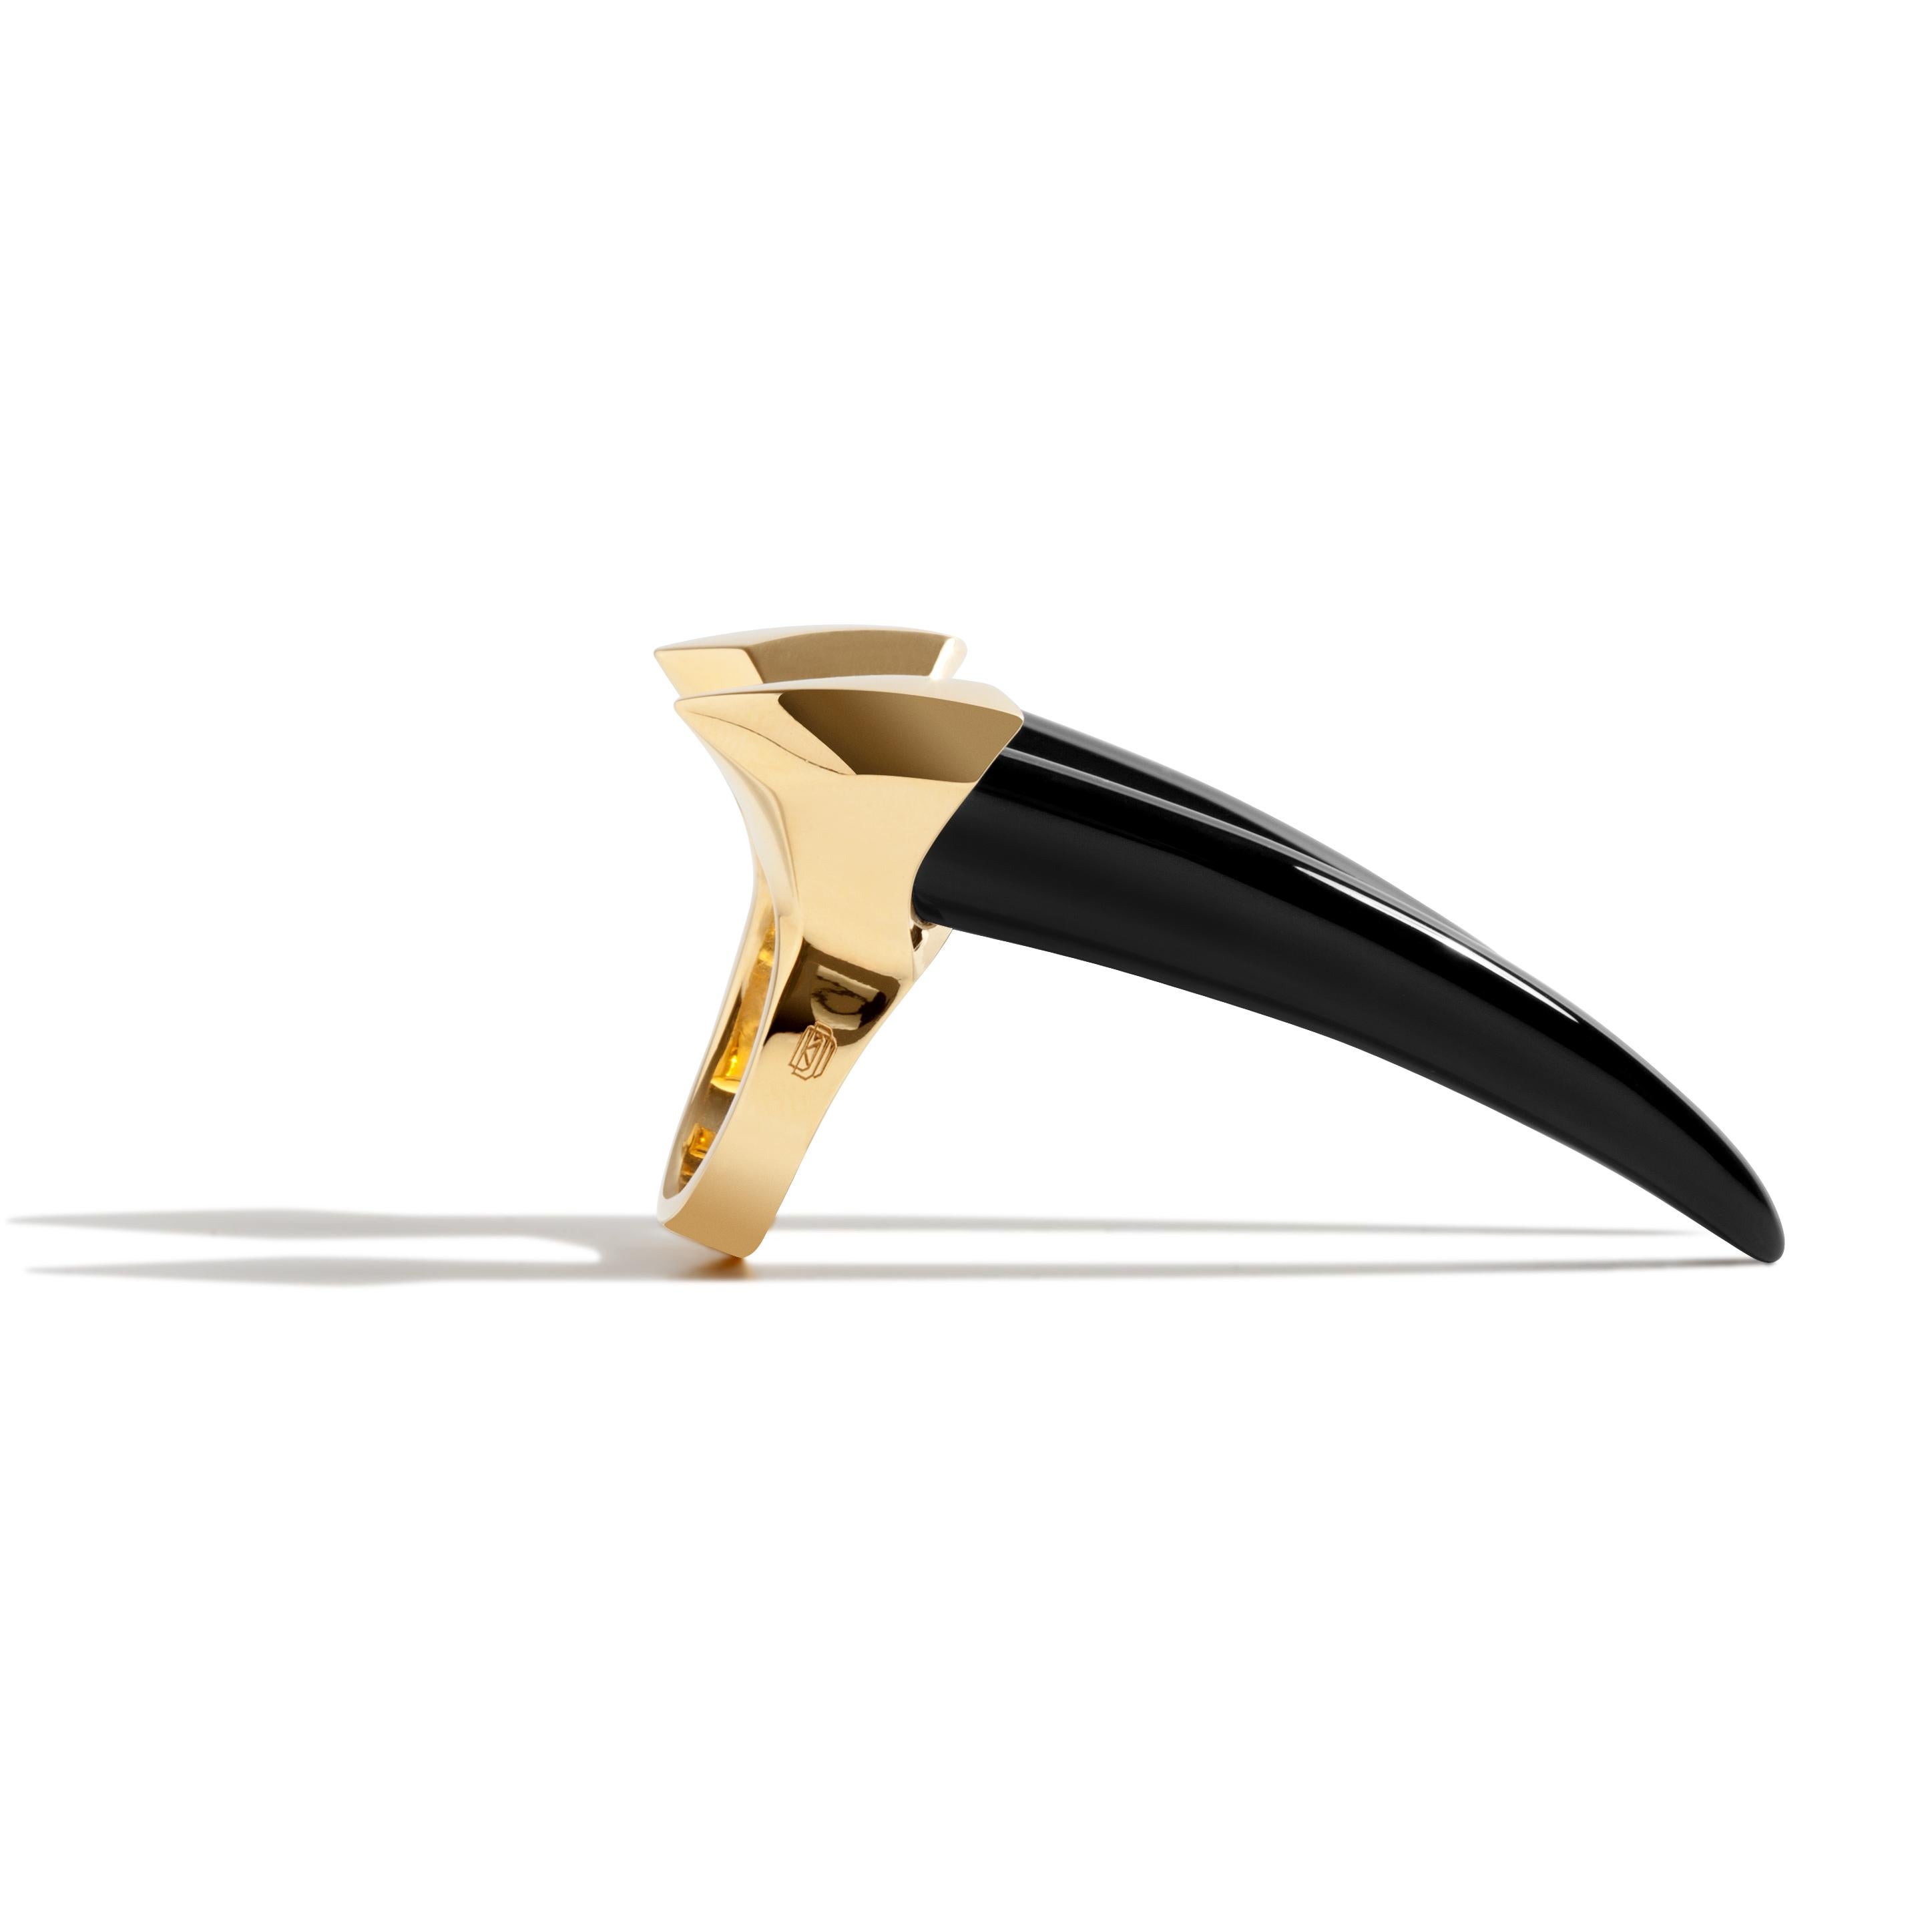 The Damian Onyx Horn Ring by Angie Marei luxuriously crafted in 18-karat yellow gold and hand-carved black onyx is the ultimate must-have statement piece. The powerful yet sensual sculptural design inspired by amulets and talismans worn by the